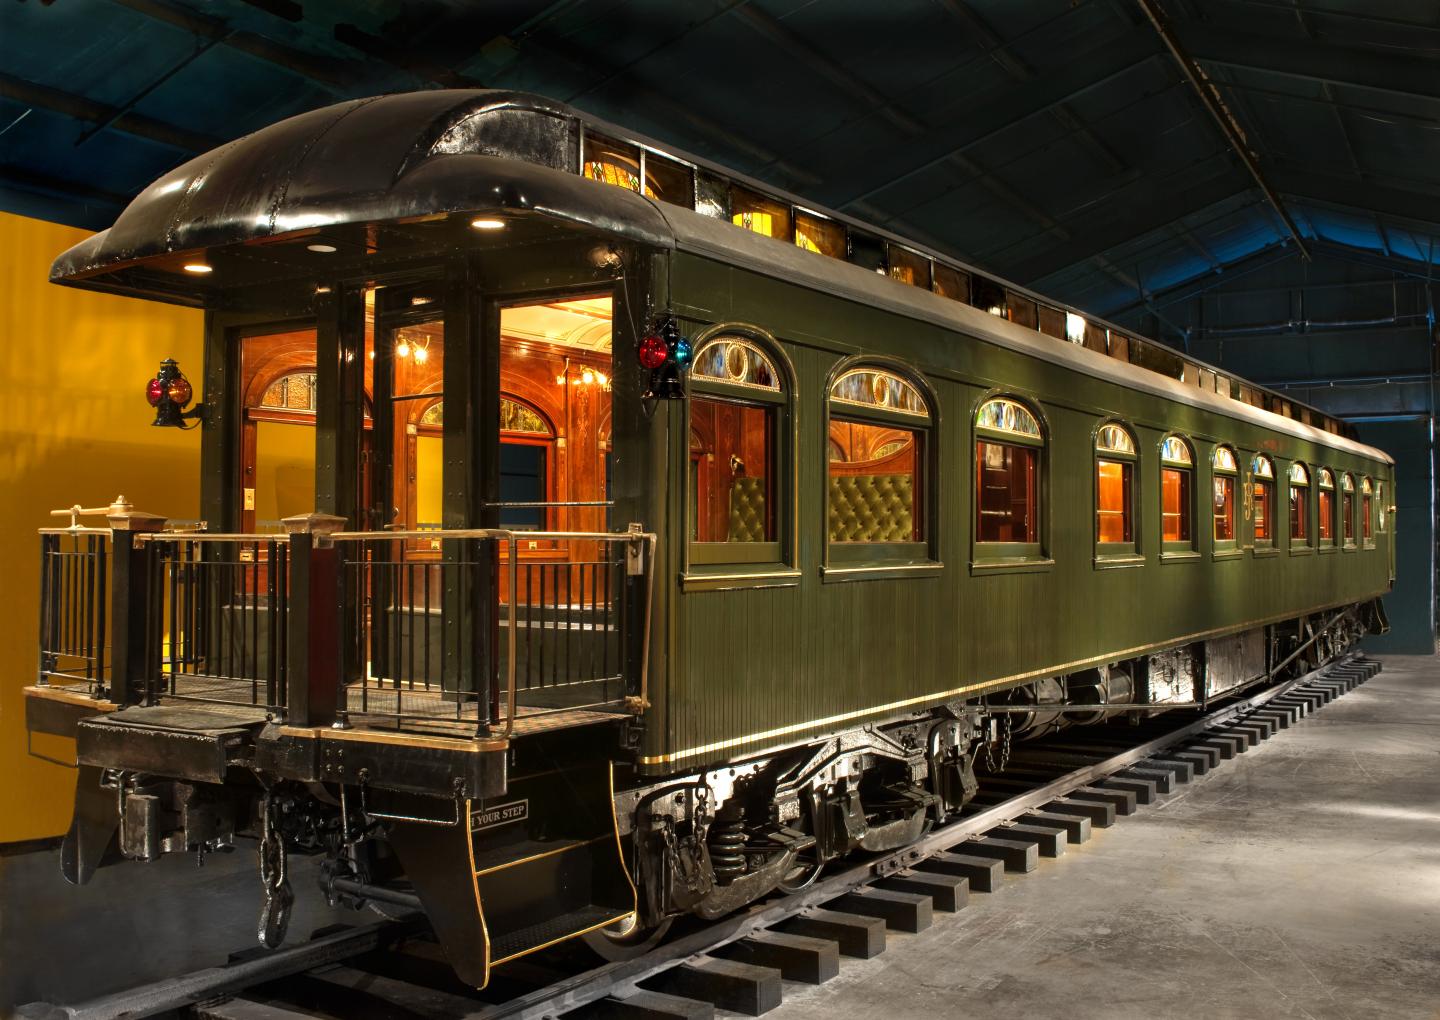 John Ringling's personal train car used in the early 1900s. (Source: The Ringling Museum)